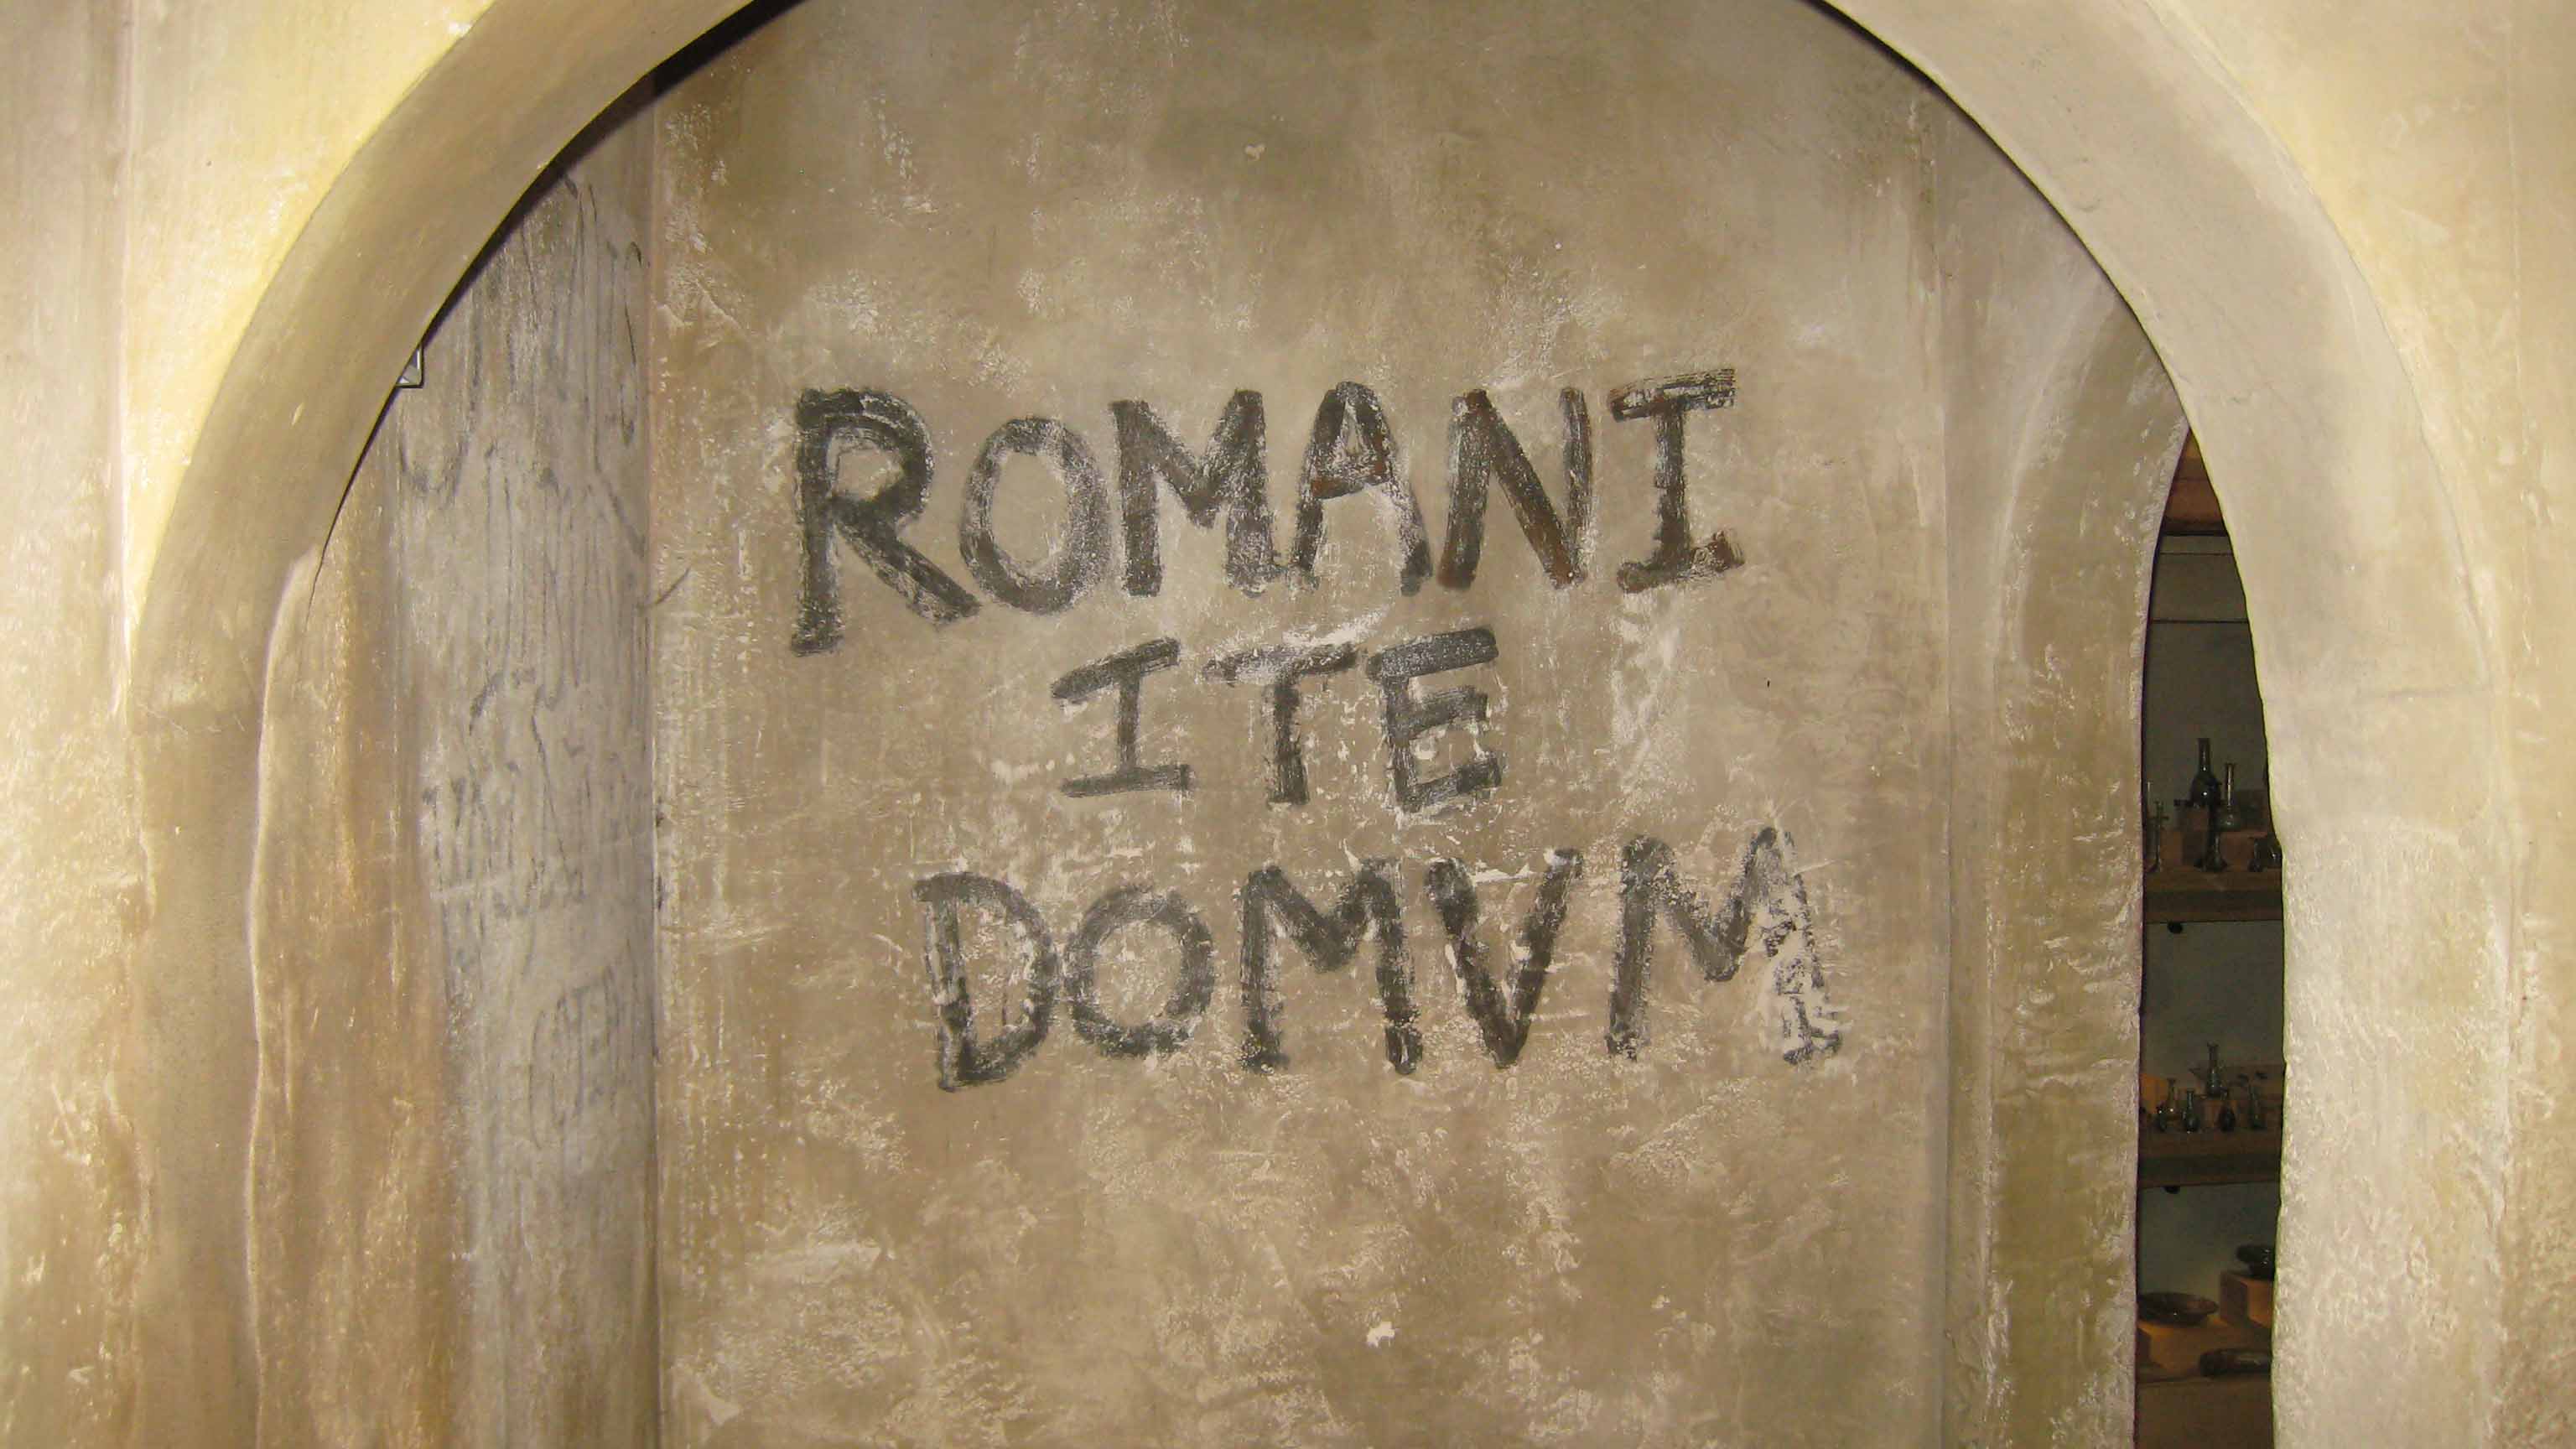 “Romans go home”. Mocked-up Roman graffiti, referencing Monty Python’s Life of Brian, at the Hull and East Riding Museum. By Chemical Engineer, licensed under CC BY-SA 4.0